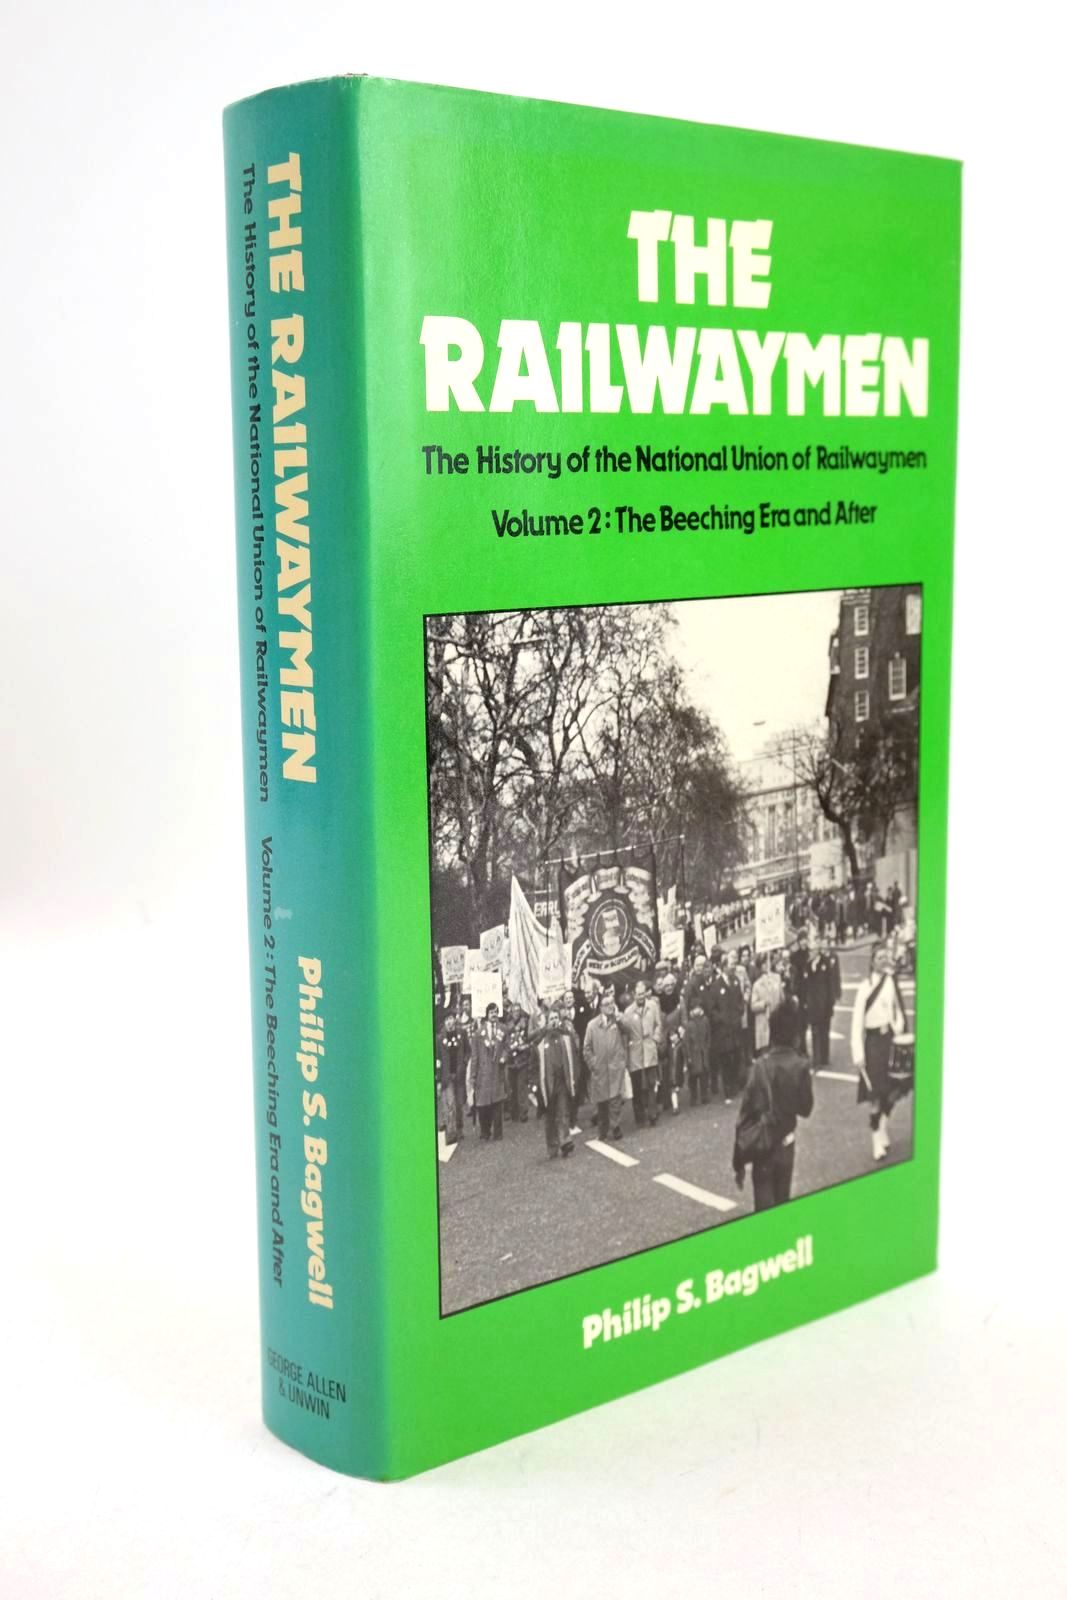 Photo of THE RAILWAYMEN VOLUME 2: THE BEECHING ERA AND AFTER written by Bagwell, Philip S. published by George Allen &amp; Unwin Ltd. (STOCK CODE: 1326543)  for sale by Stella & Rose's Books